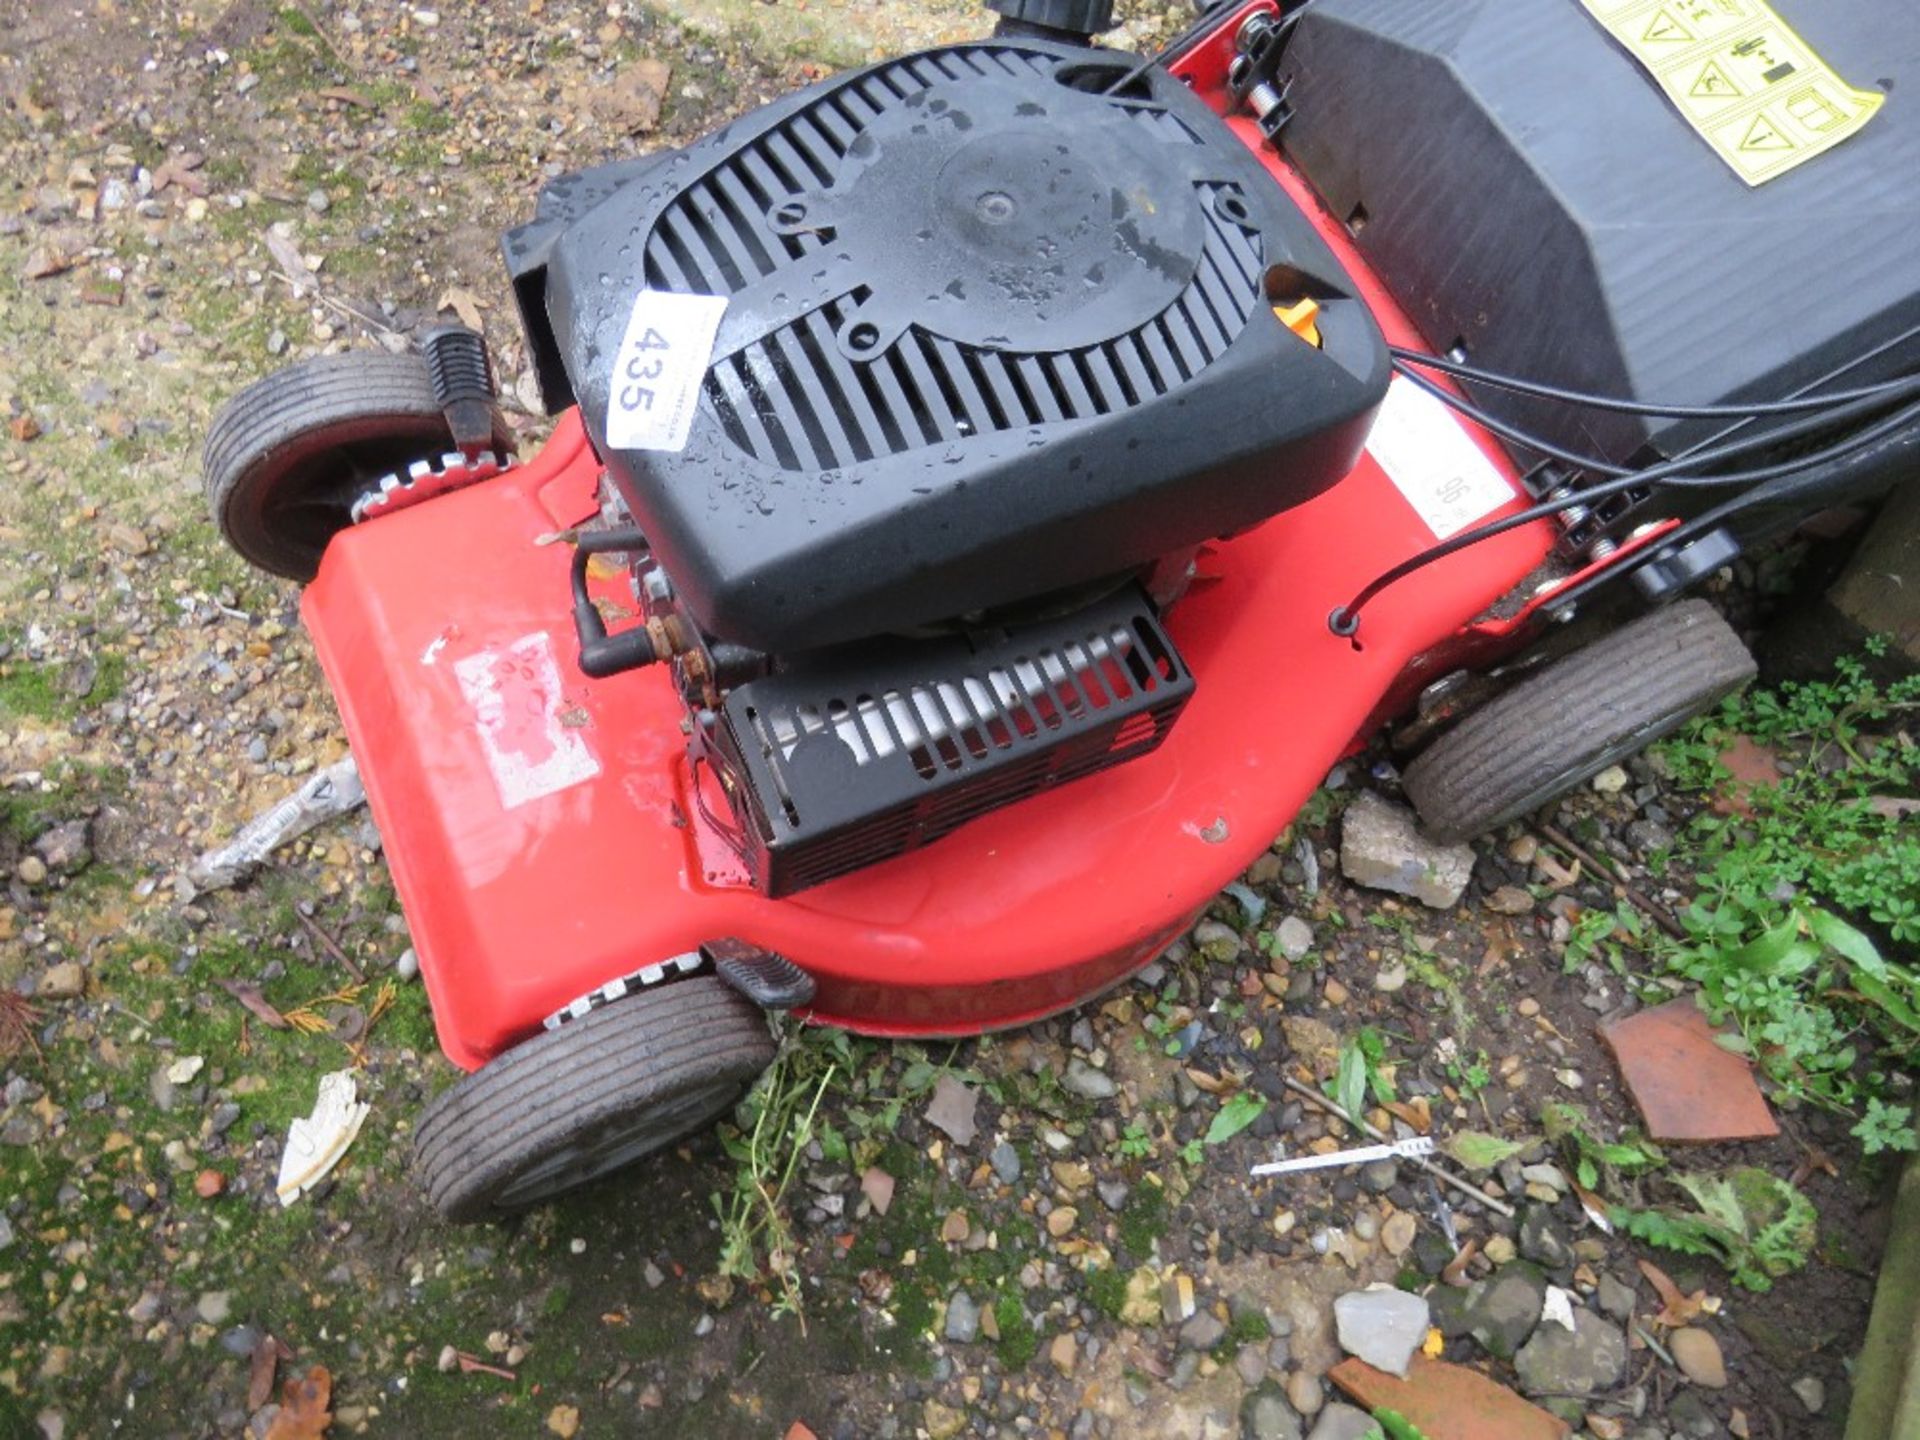 RED PETROL ENGINED LAWN MOWER, WITH BOX. THIS LOT IS SOLD UNDER THE AUCTIONEERS MARGIN SCHEME, TH - Image 2 of 3